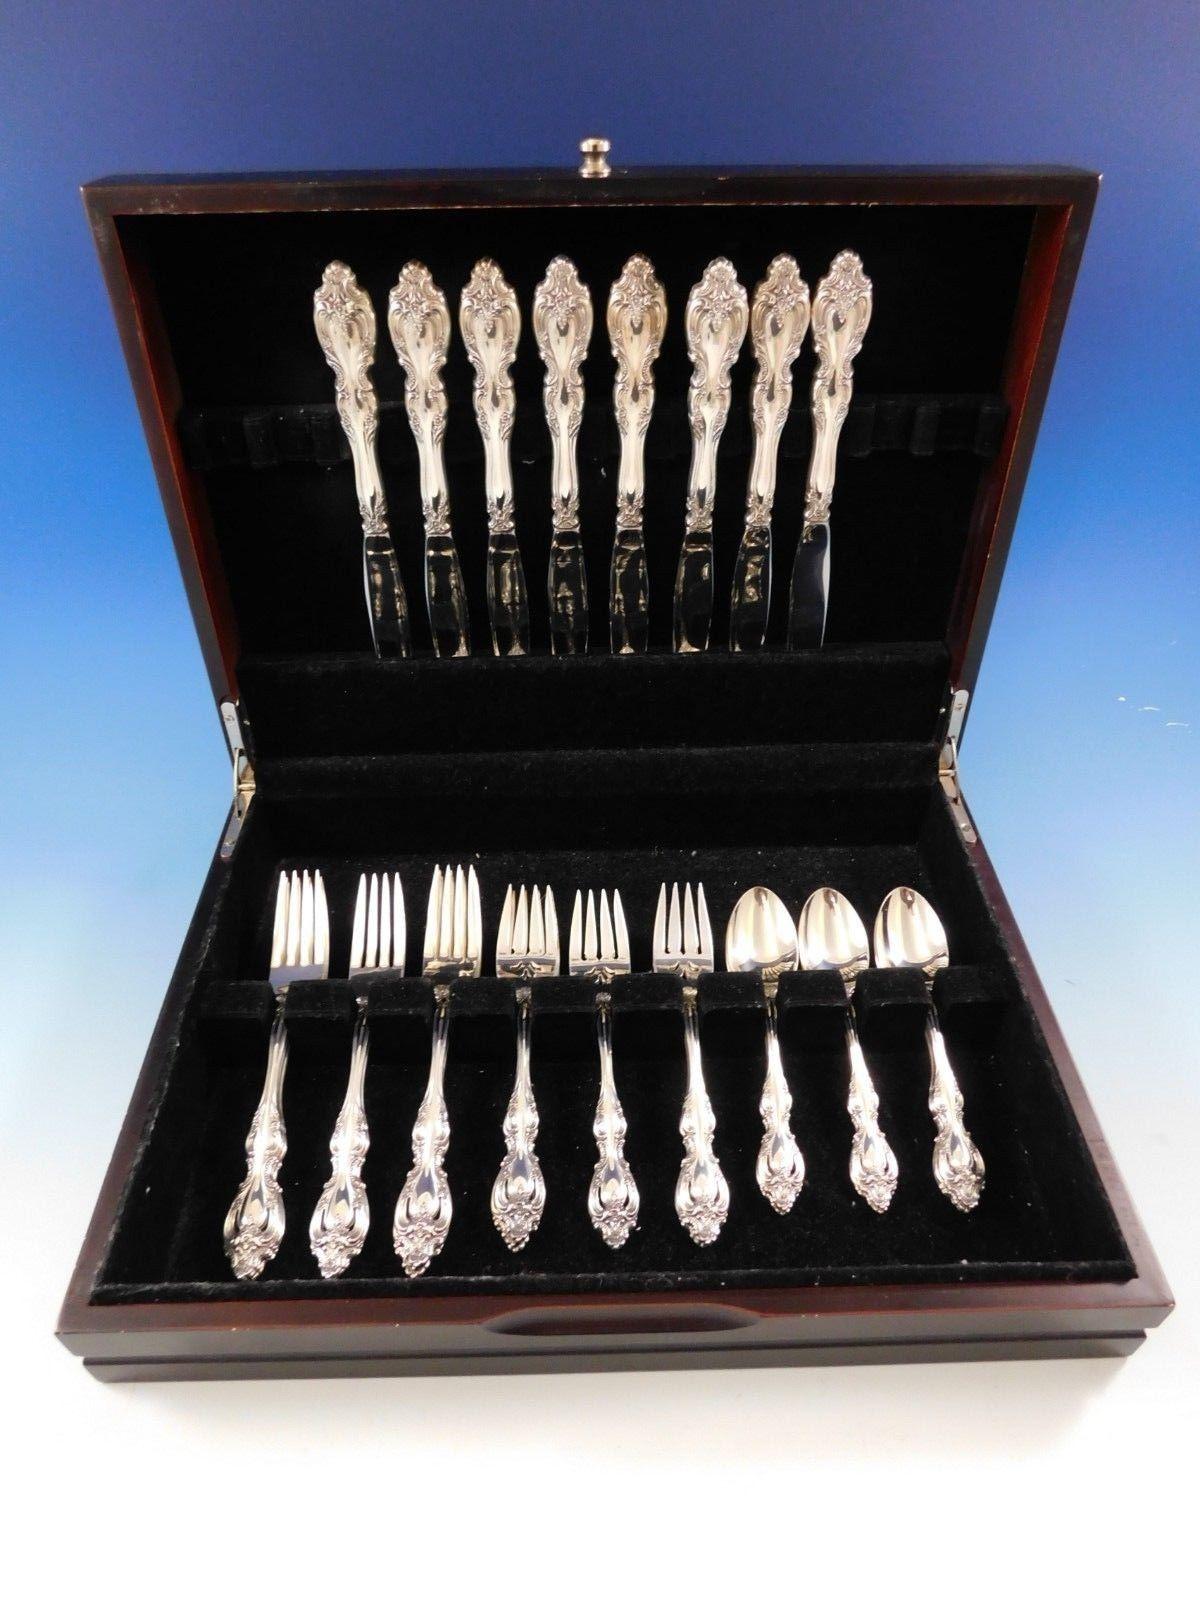 Stunning Du Maurier by Oneida sterling silver flatware set, 32 pieces. This set includes:

8 knives, 9 1/4